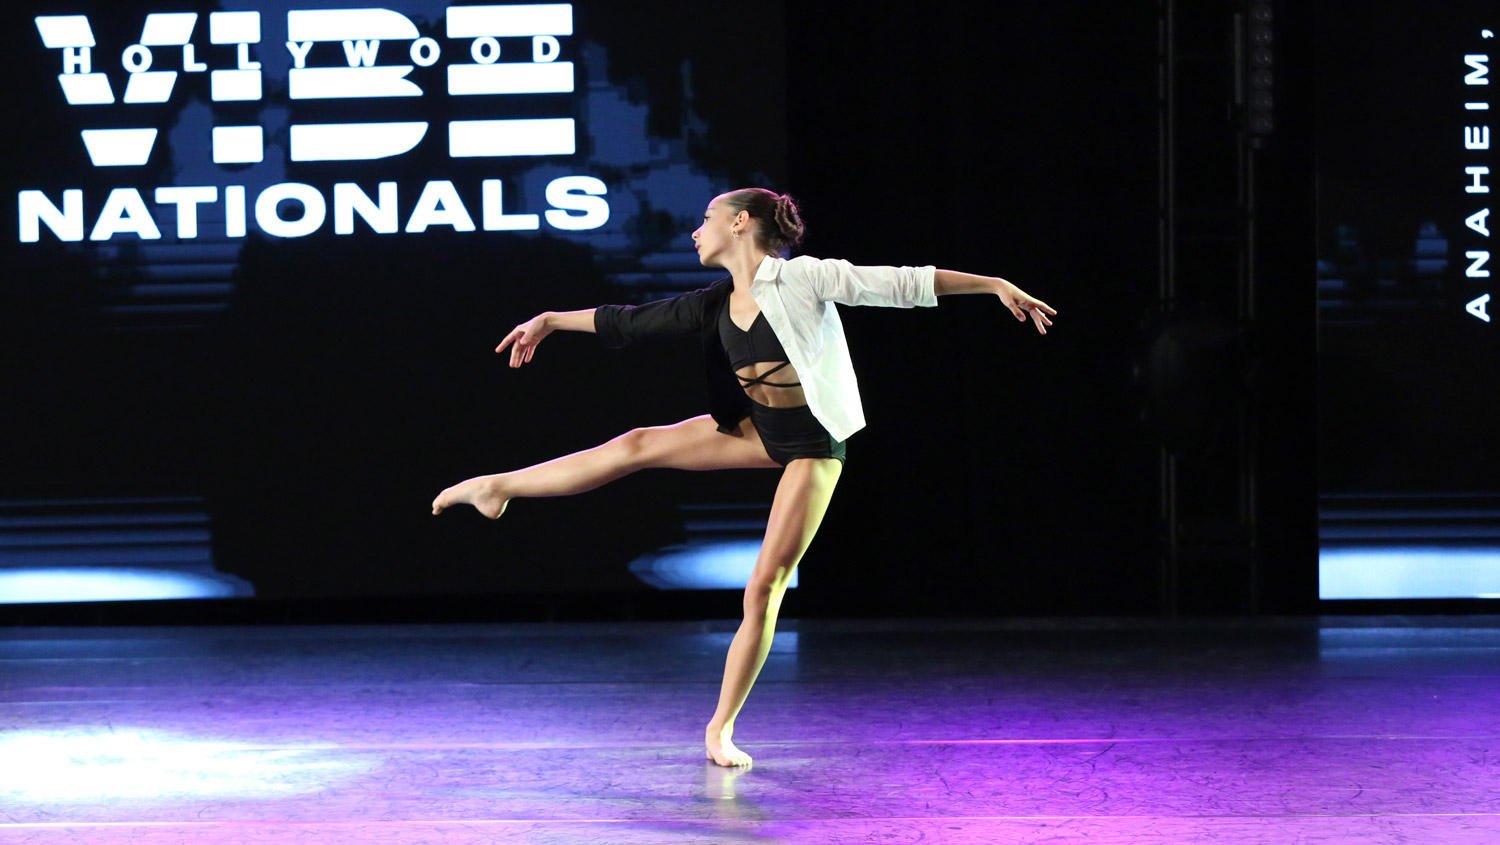 HOLLYWOOD VIBE NATIONALS ANAHEIM - INTERMEDIATE Dancer of the Year Aoife Nugent Steps Dance Center